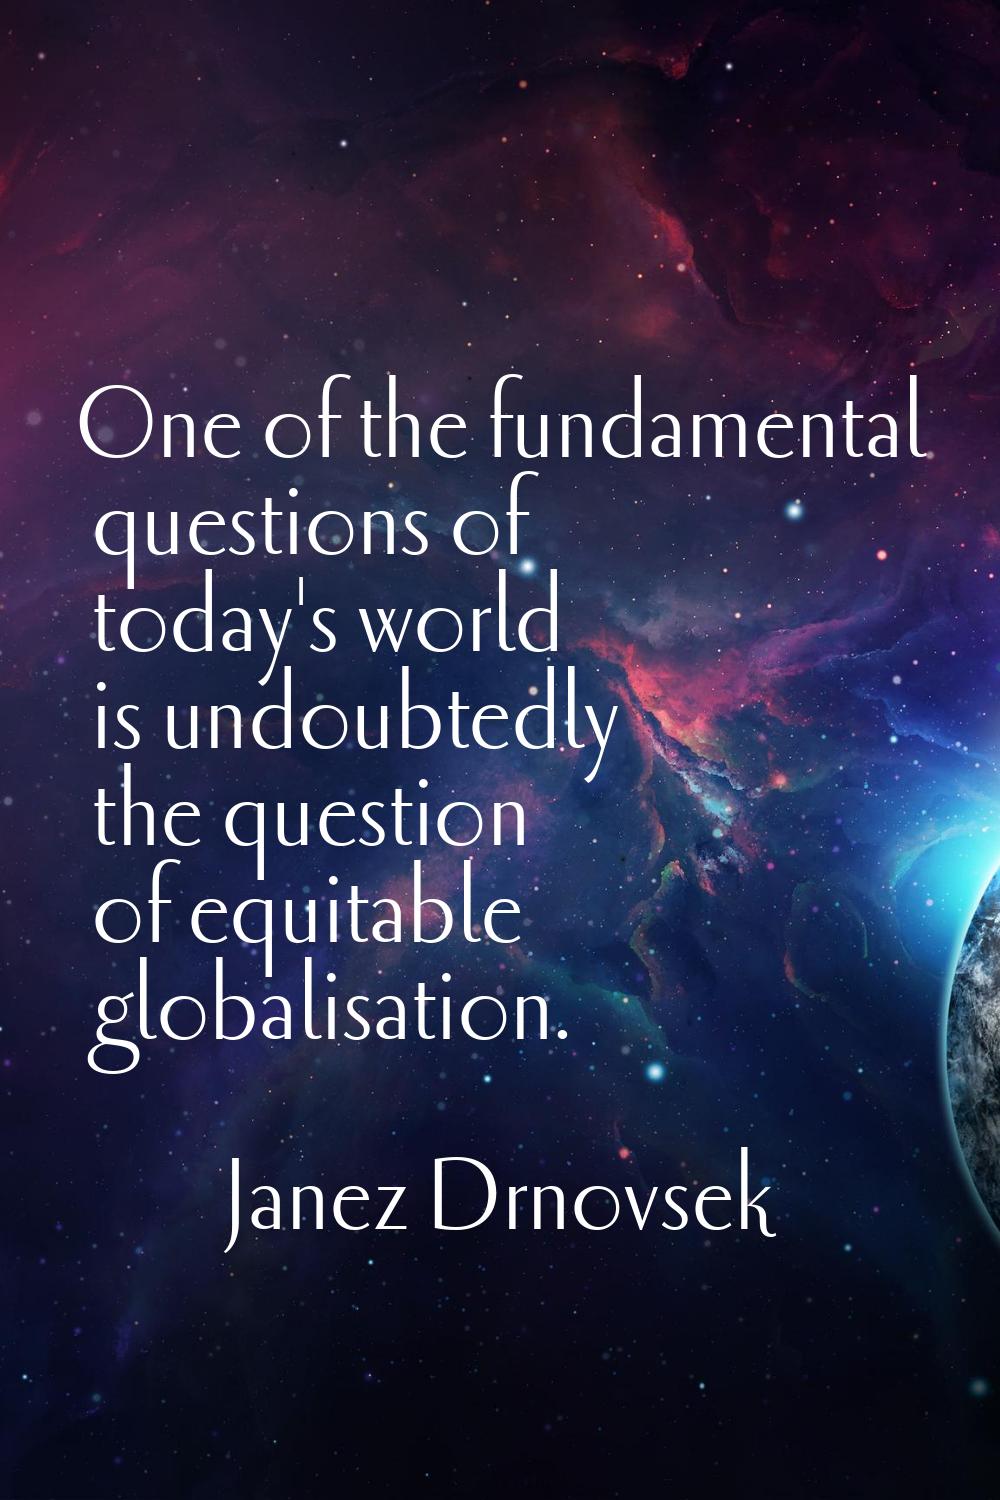 One of the fundamental questions of today's world is undoubtedly the question of equitable globalis